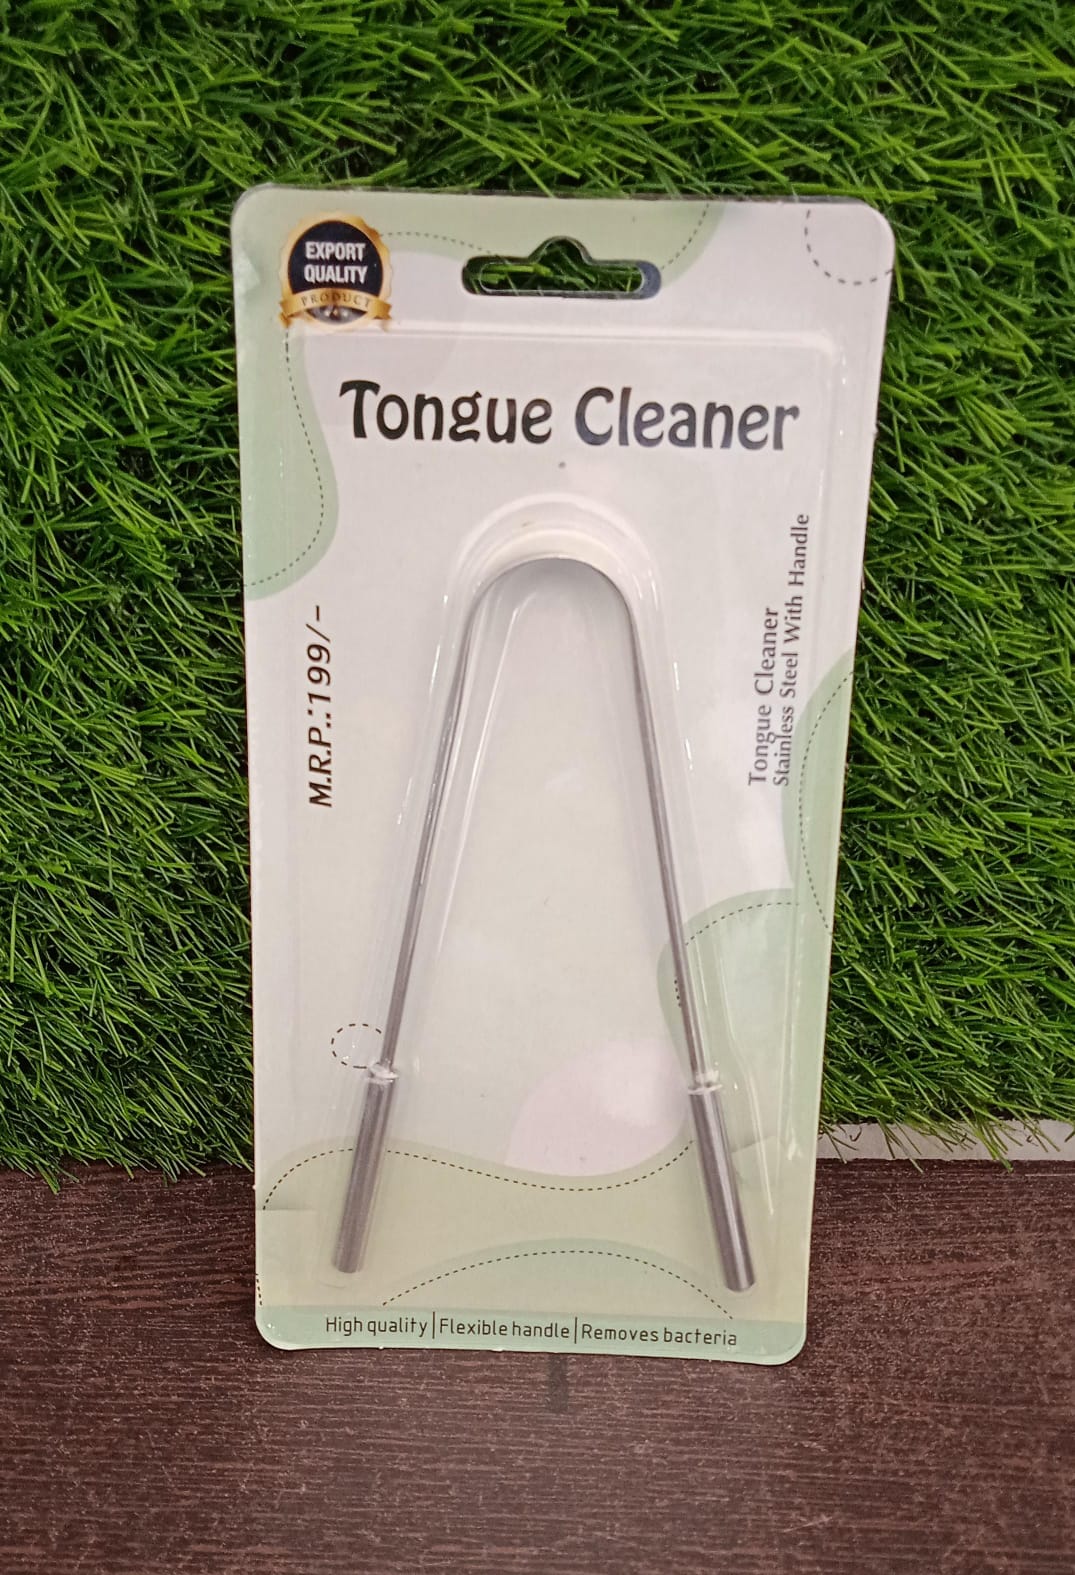 Tongue Cleaner For Kids & Adults | Tongue Scraper For Bad Breath, Maintain Oral Hygiene for Daily Use | for Fresh Breath & Bacteria Removal | Improved Taste (Steel, Copper, Tongue Cleaner / 1 Pc)